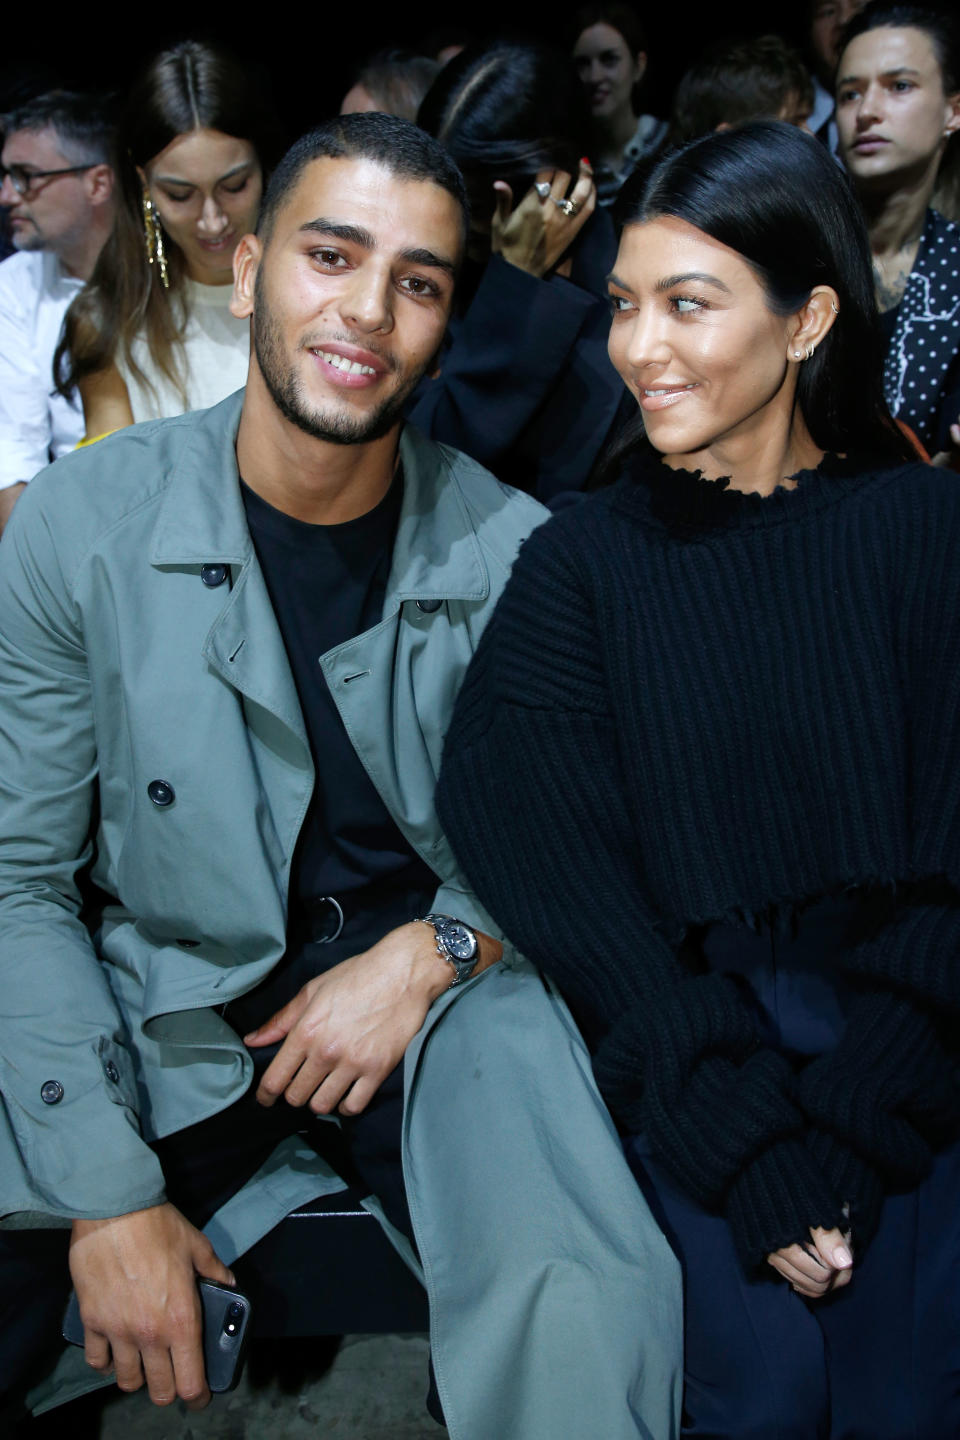 The couple was beaming as they toured through Paris during Fashion Week.